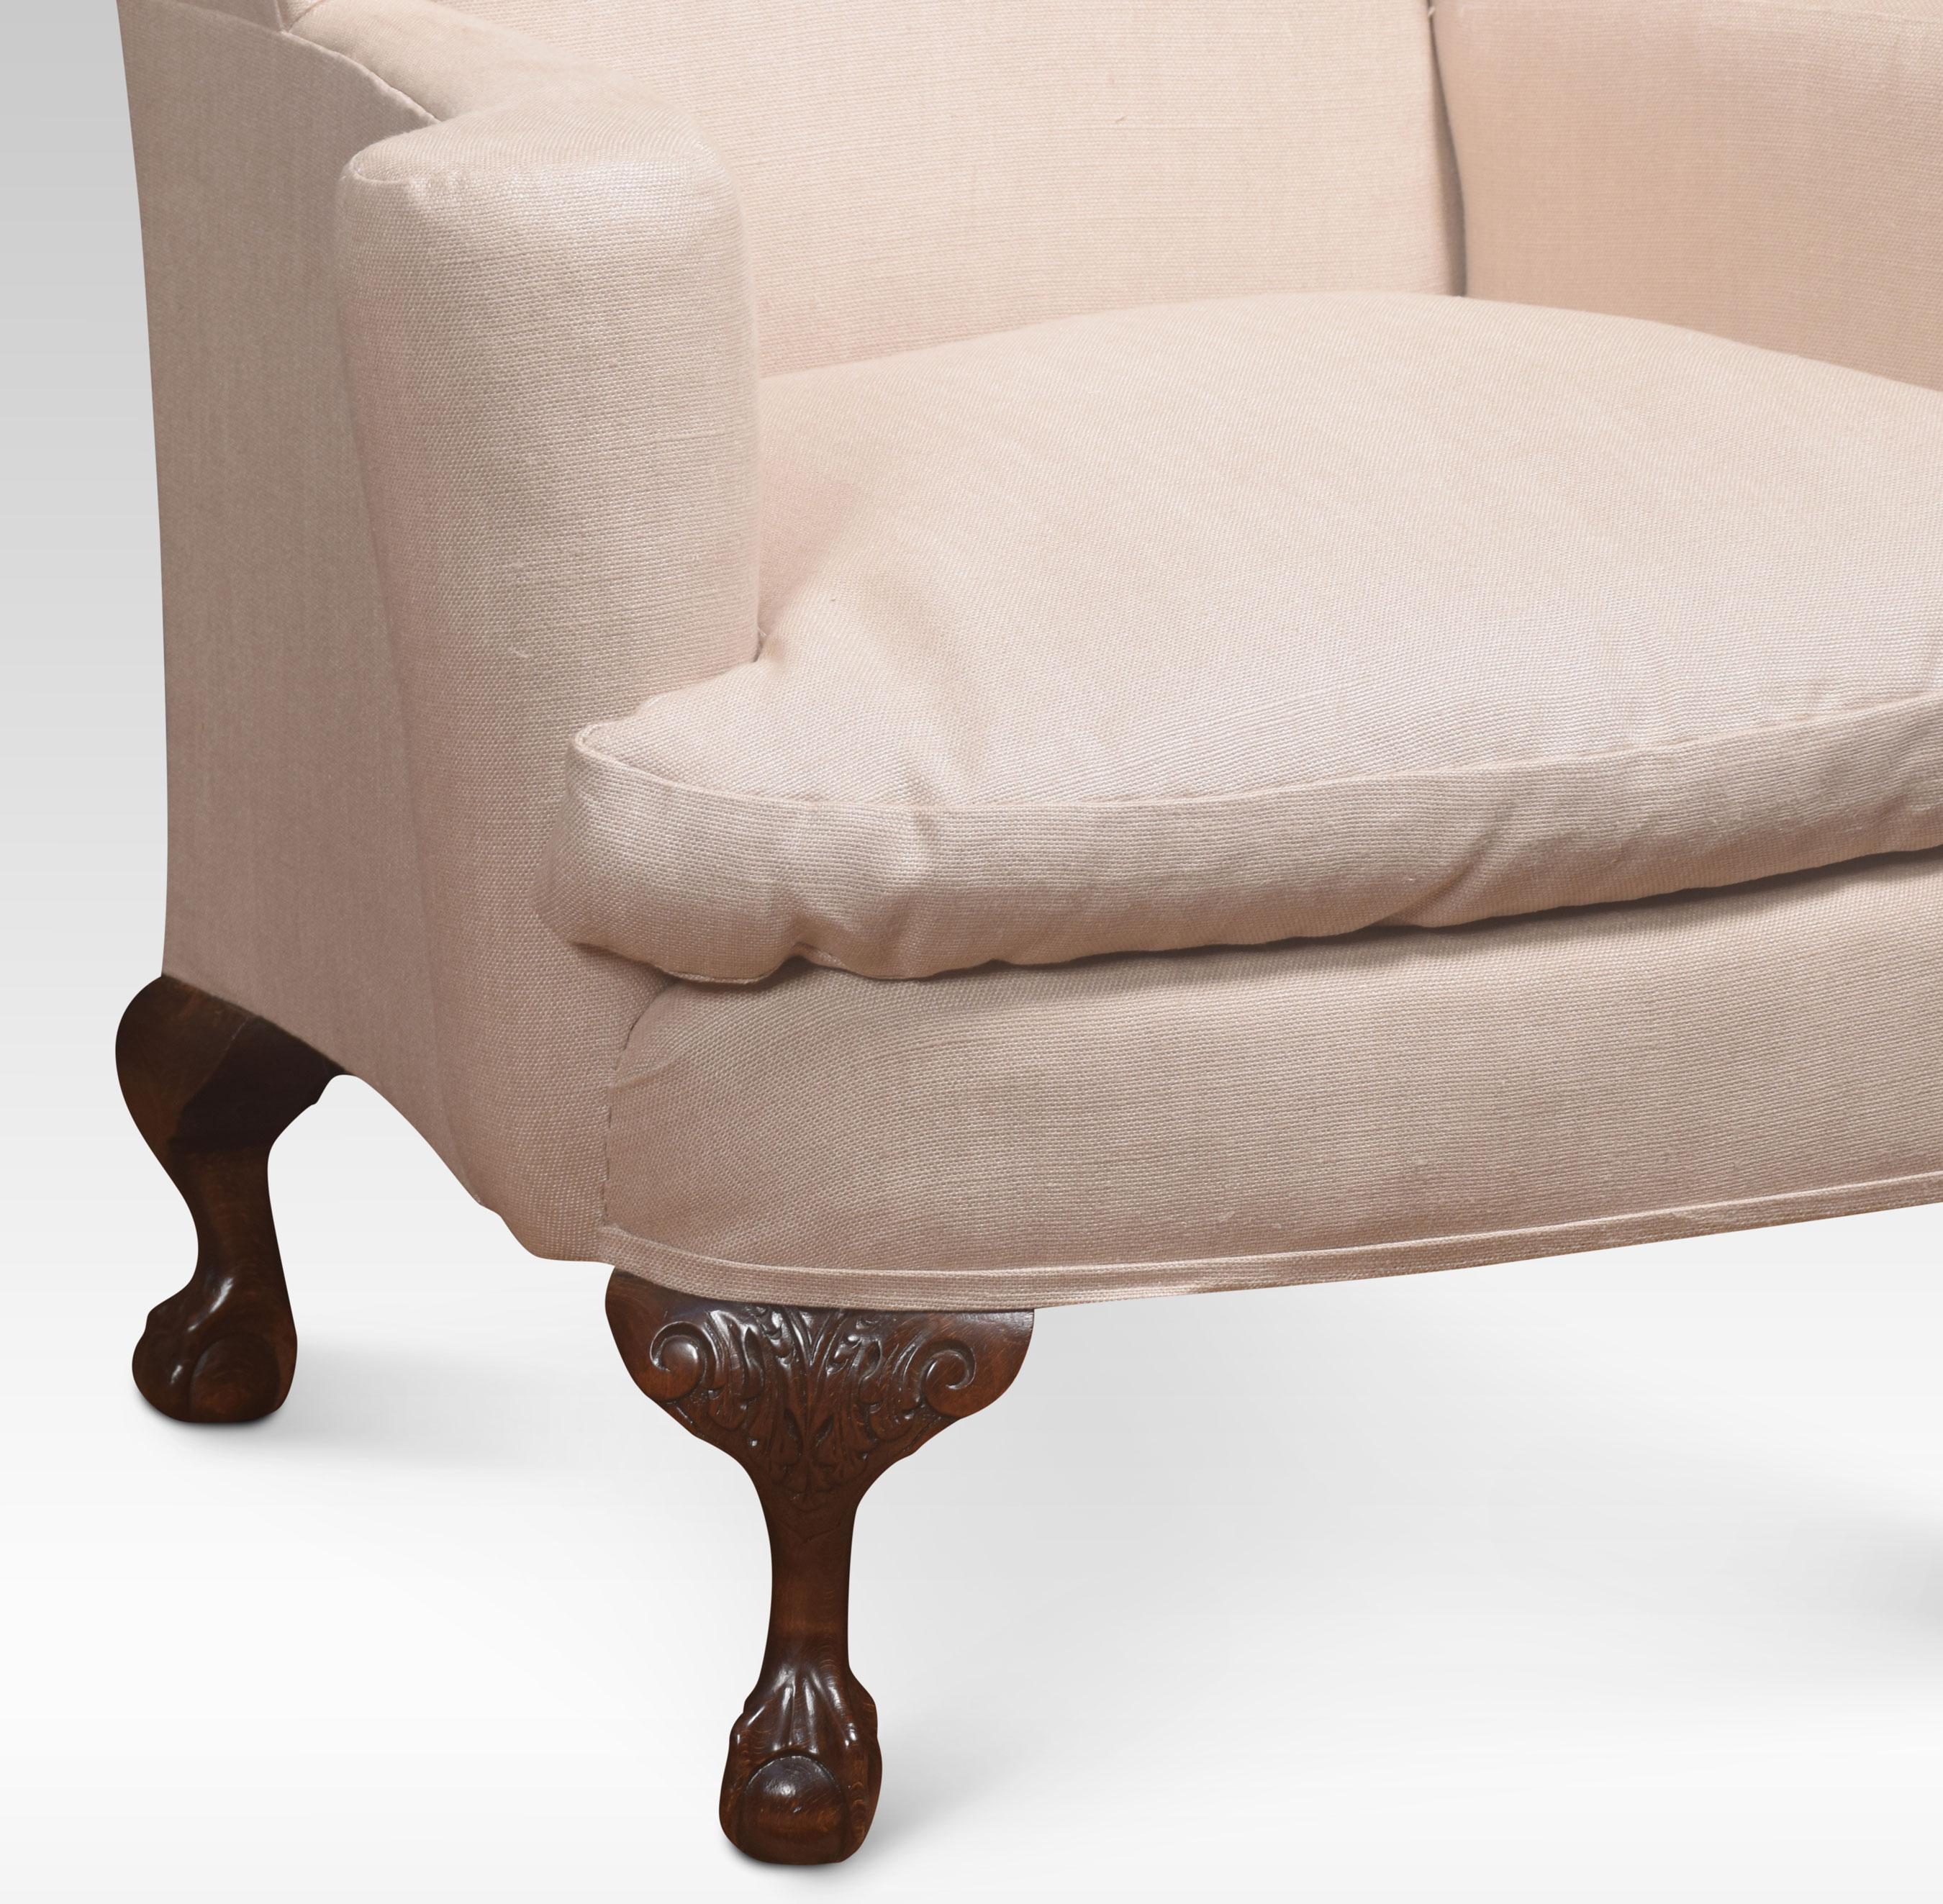 Pair of Georgian style wing armchairs, the winged backs, and out swept arms. Raised up on acanthus capped cabriole legs terminating in claw and ball feet.
Dimensions:
Height 40 inches height to seat 17.5 inches
Width 34 inches
Depth 31 inches.